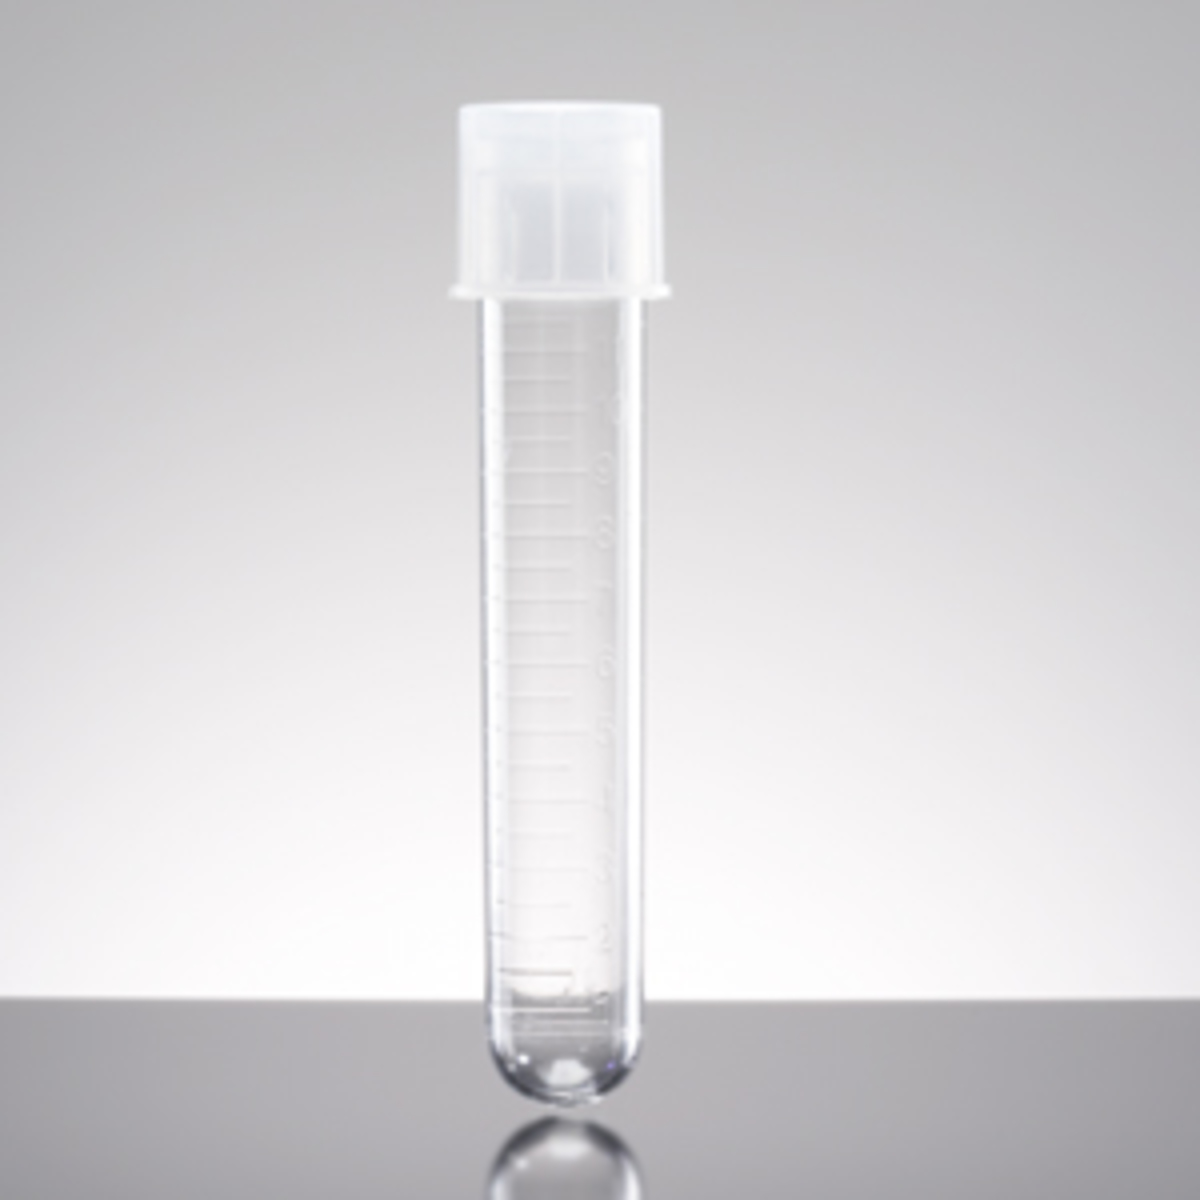 Falcon® 14 mL Round Bottom Polystyrene Test Tube, with Snap Cap, Sterile, 25/Pack, 500/Case